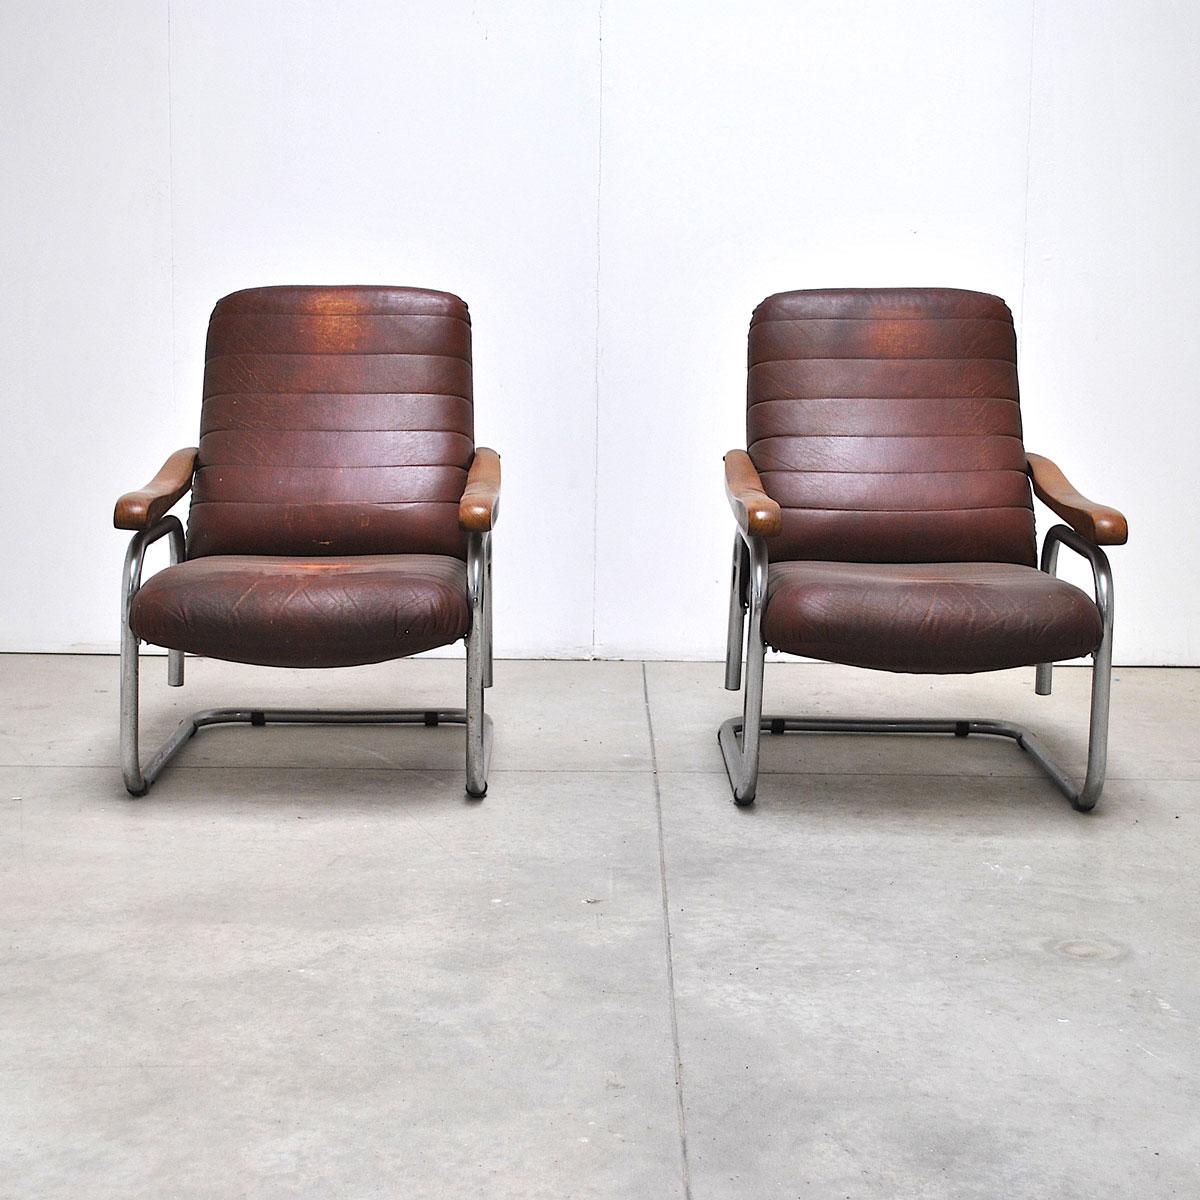 Italian armchair midcentury late 1950s in Bauhaus style 
n.b. as you can see from the top, the armchairs should be covered


These fabric on these chairs are customized. We have our own in-house upholstery studio that can expertly reupholster